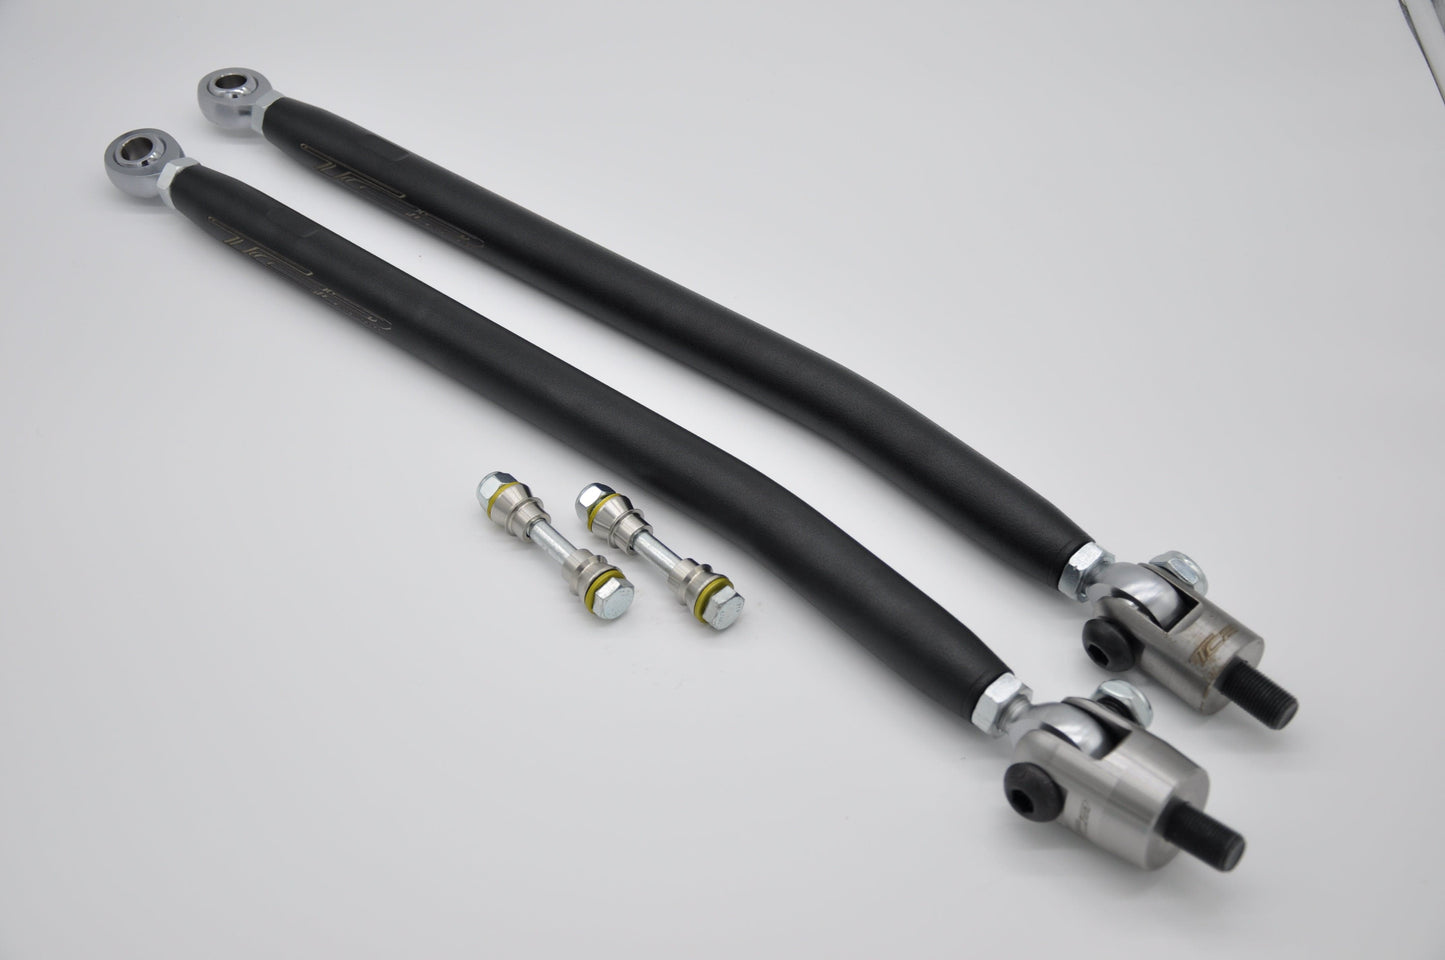 Heavy Duty Tie Rods, Rod Ends, Clevises, and Straight King Pins for Can-Am Defender with SATV +6 Lift (replaces SATV 17.75" Z Bar)